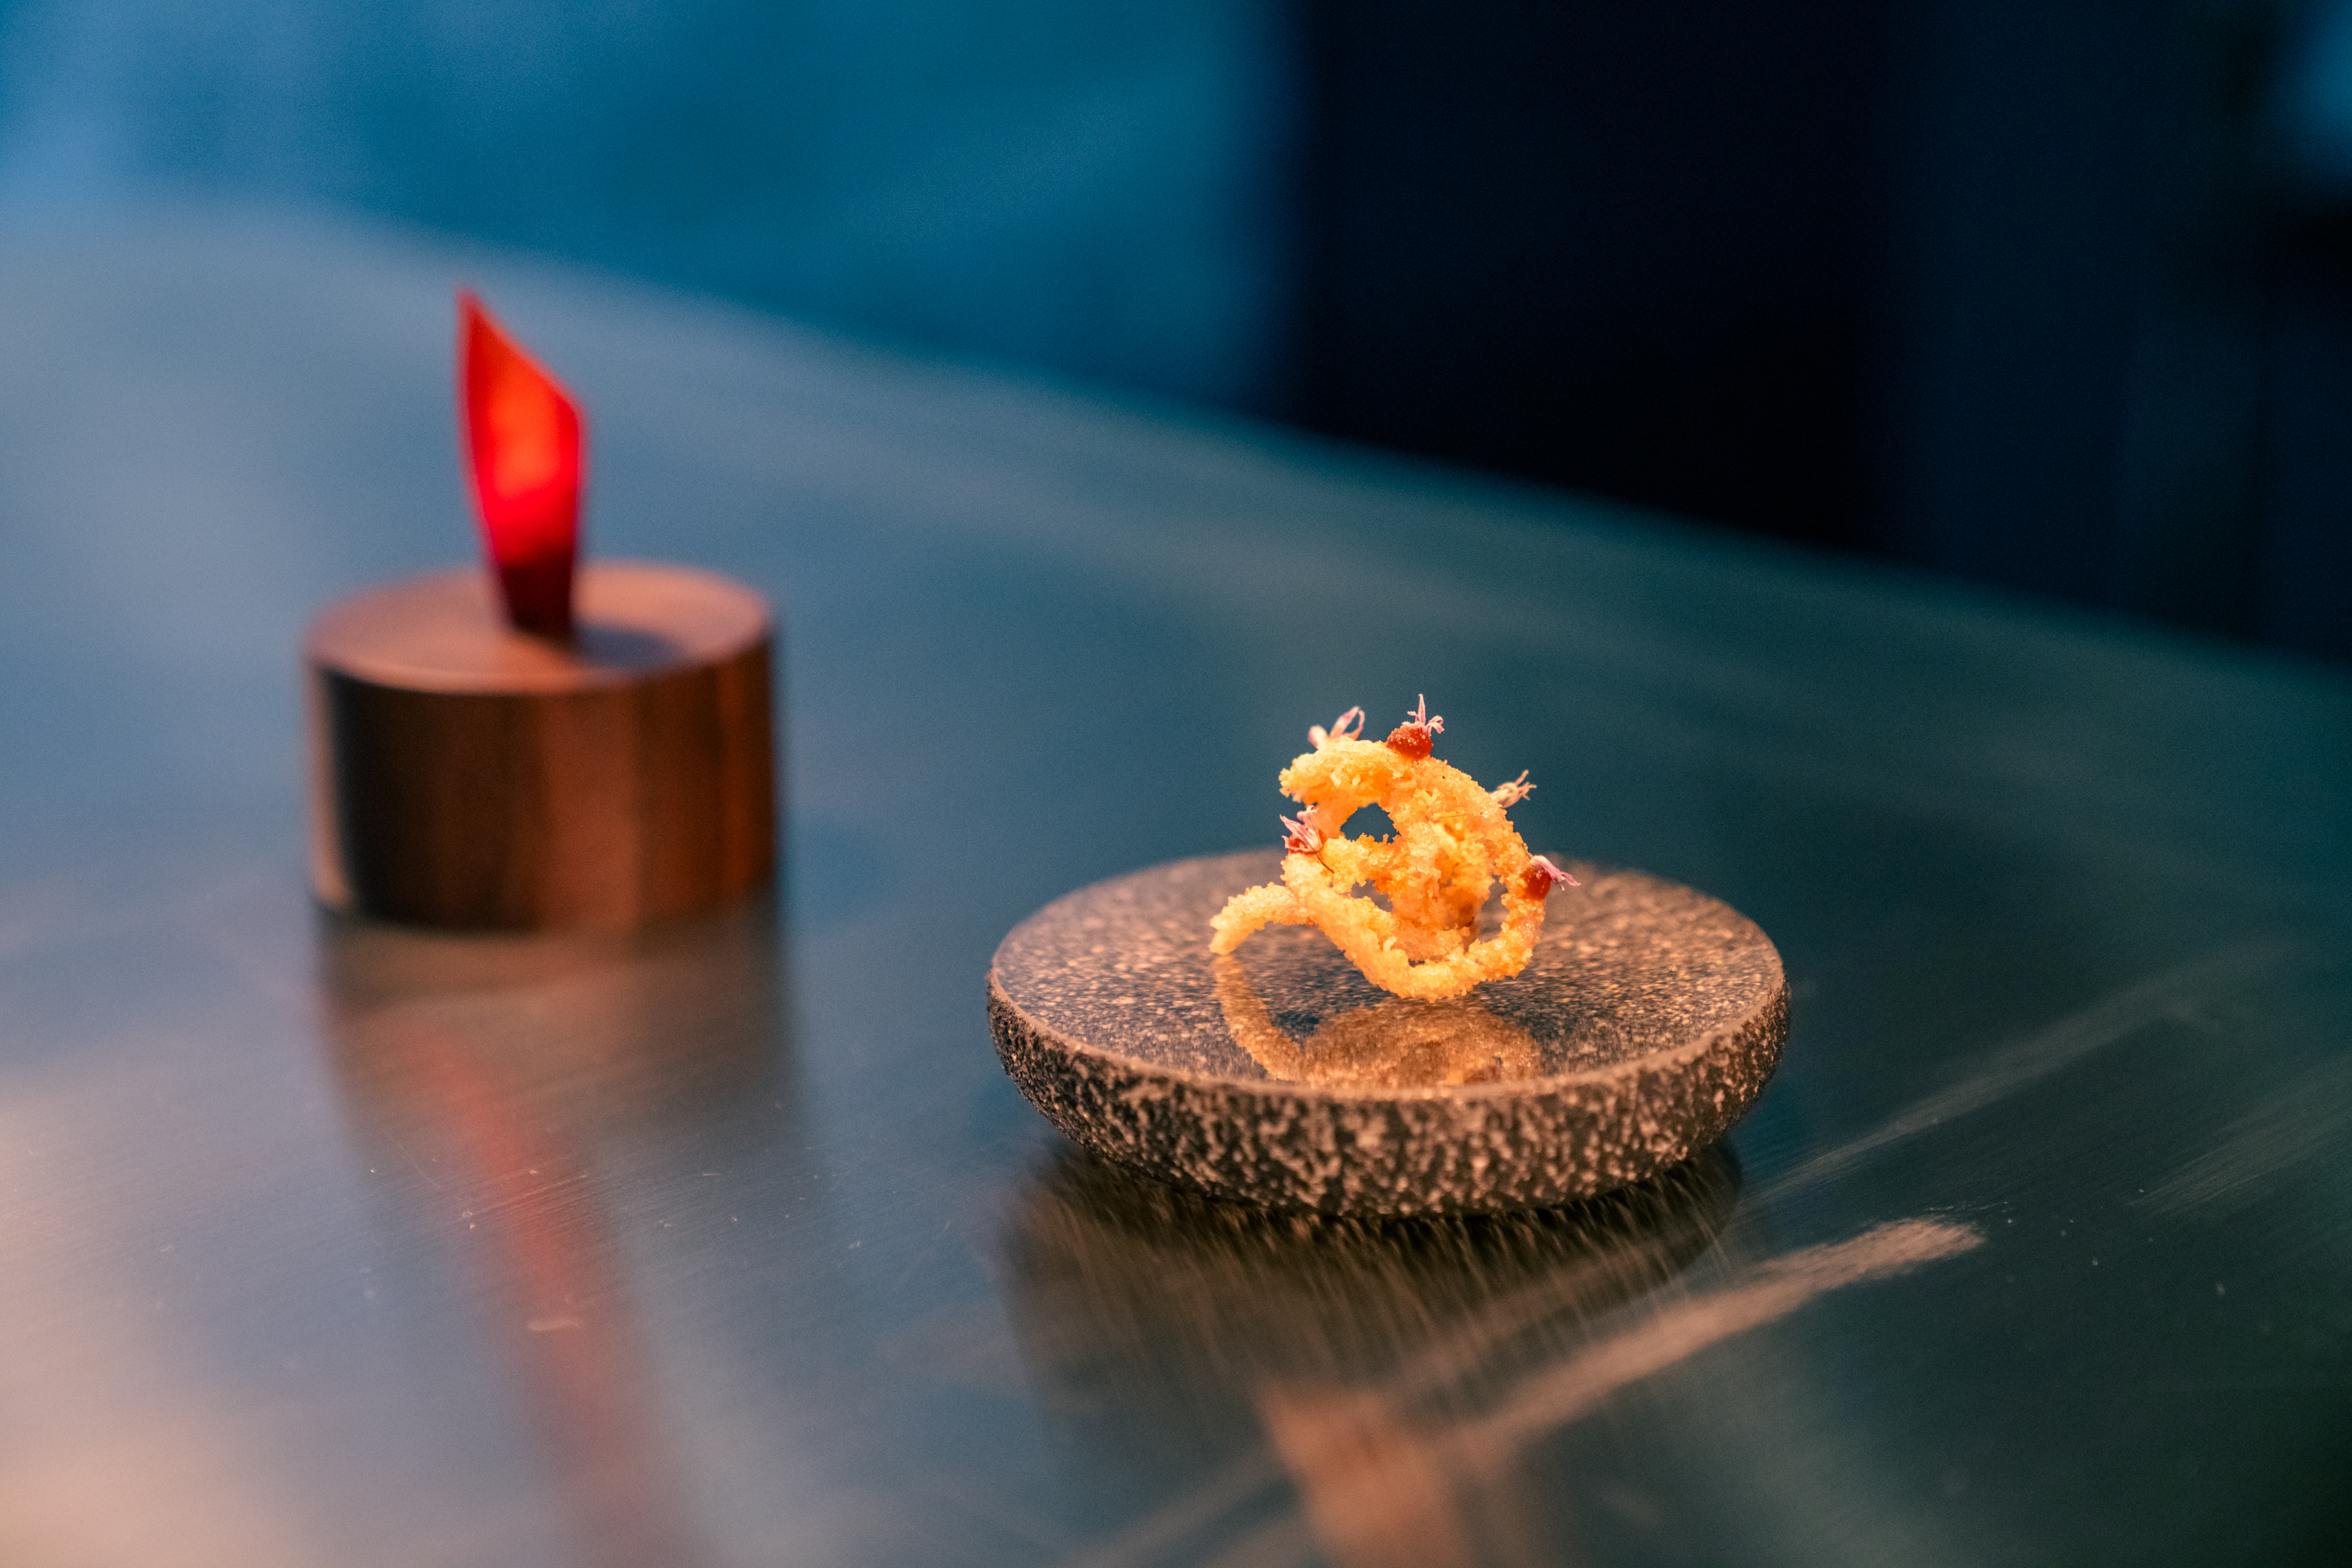 An item from the tasting menu offers a crispy fried chip made from sweet potato noodles and beef tendon dusted in caramelized onion powder.